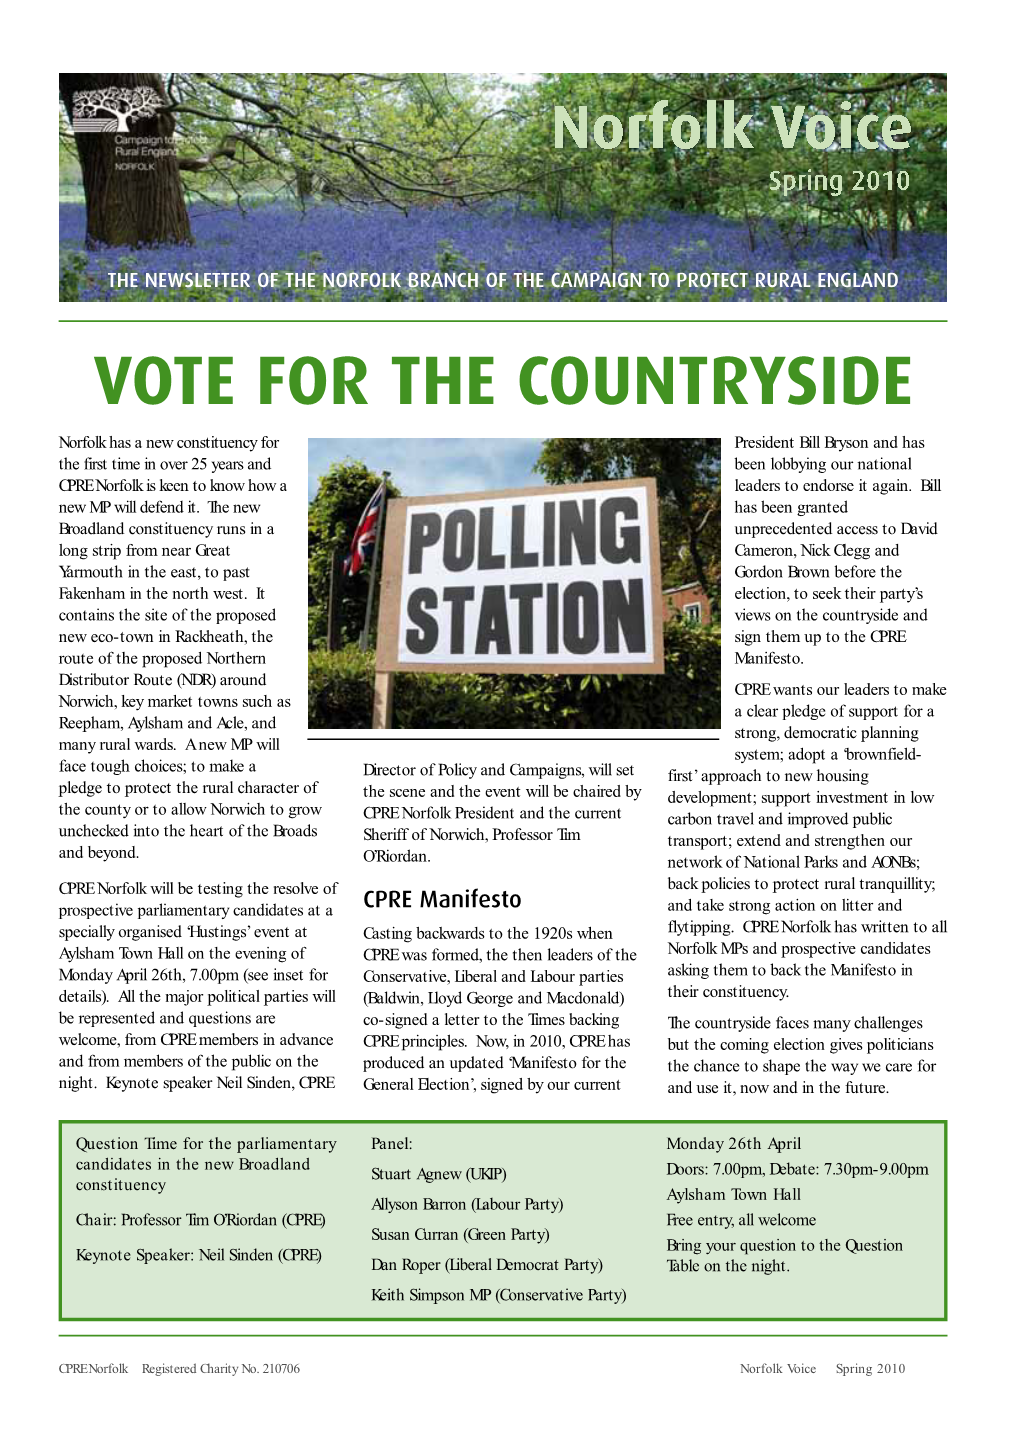 Vote for the Countryside